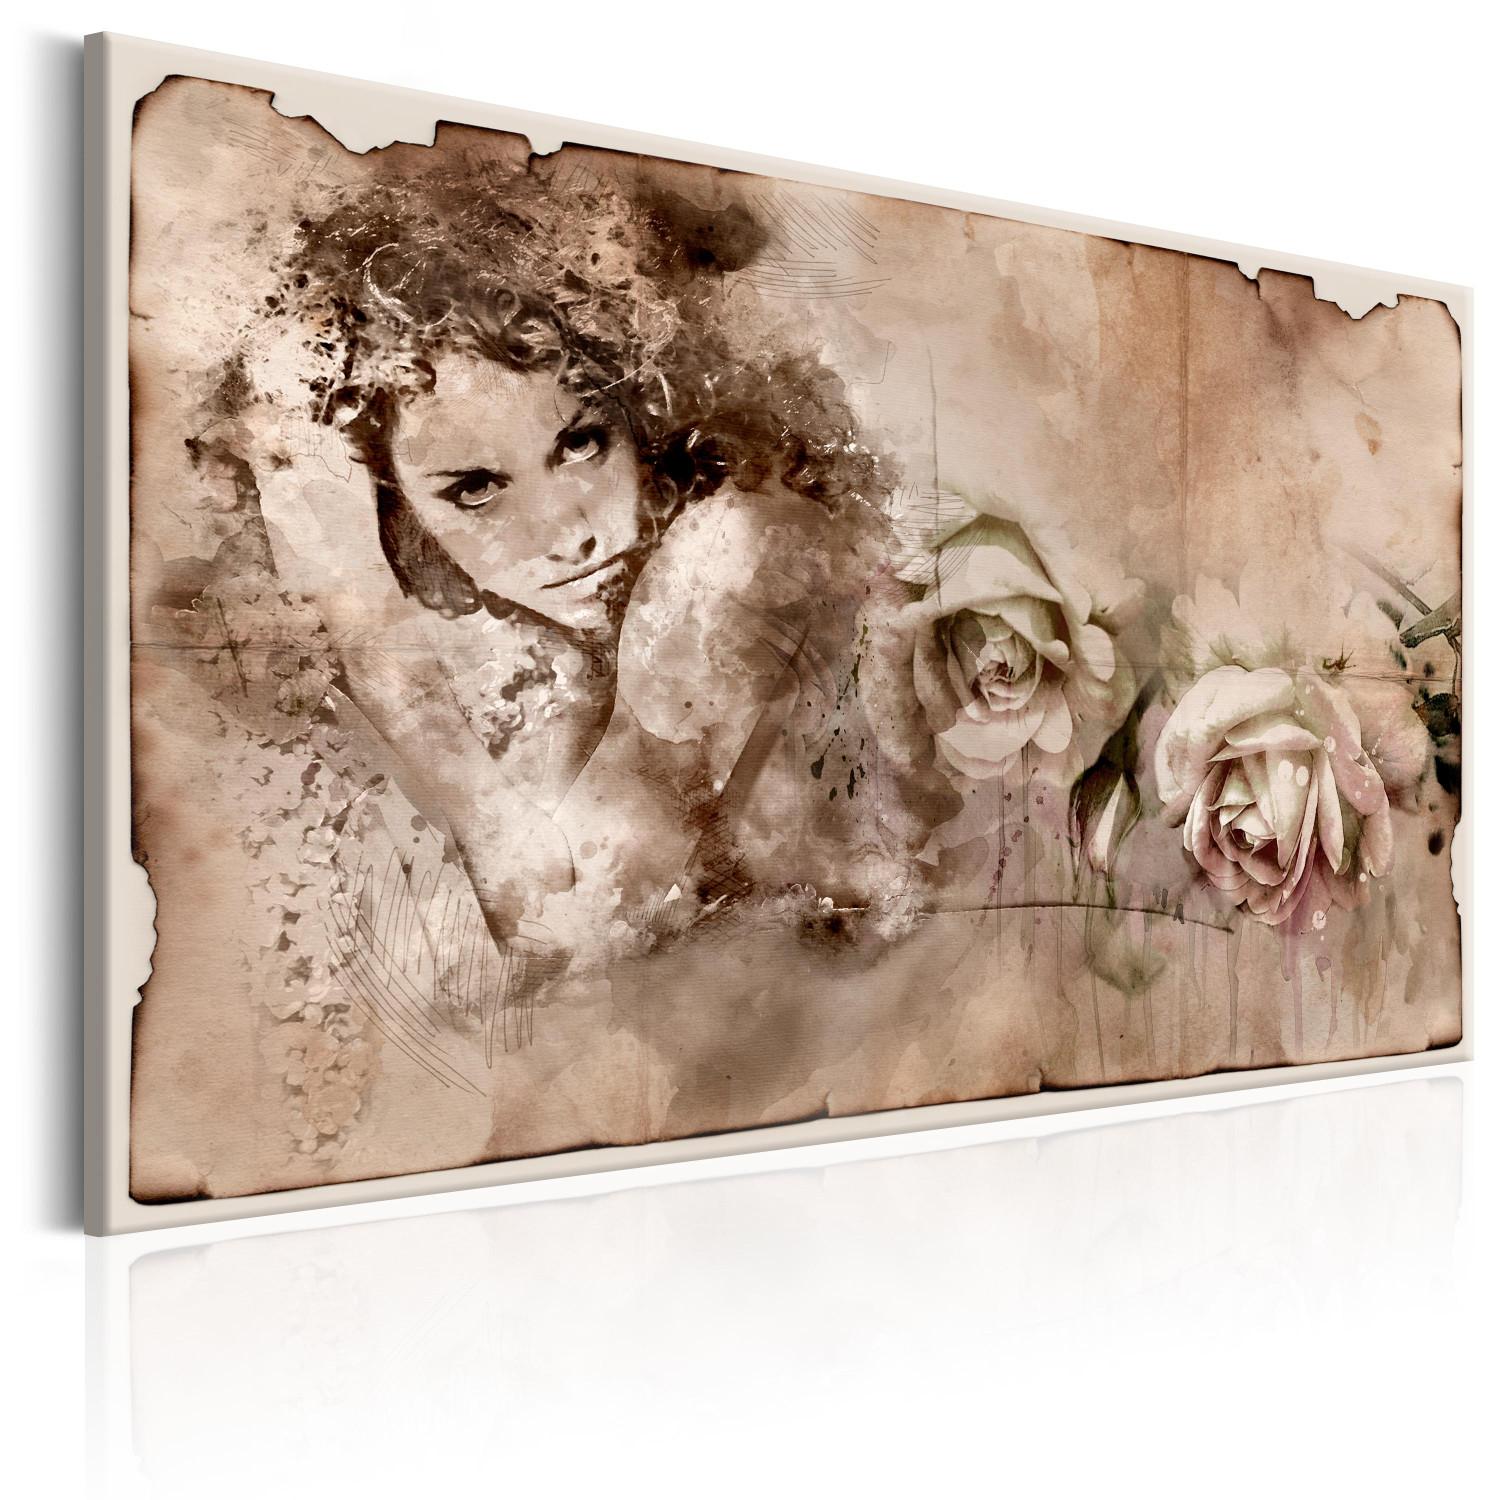 Canvas Retro Style: Woman and Roses - Romantic Portrait in Vintage Theme